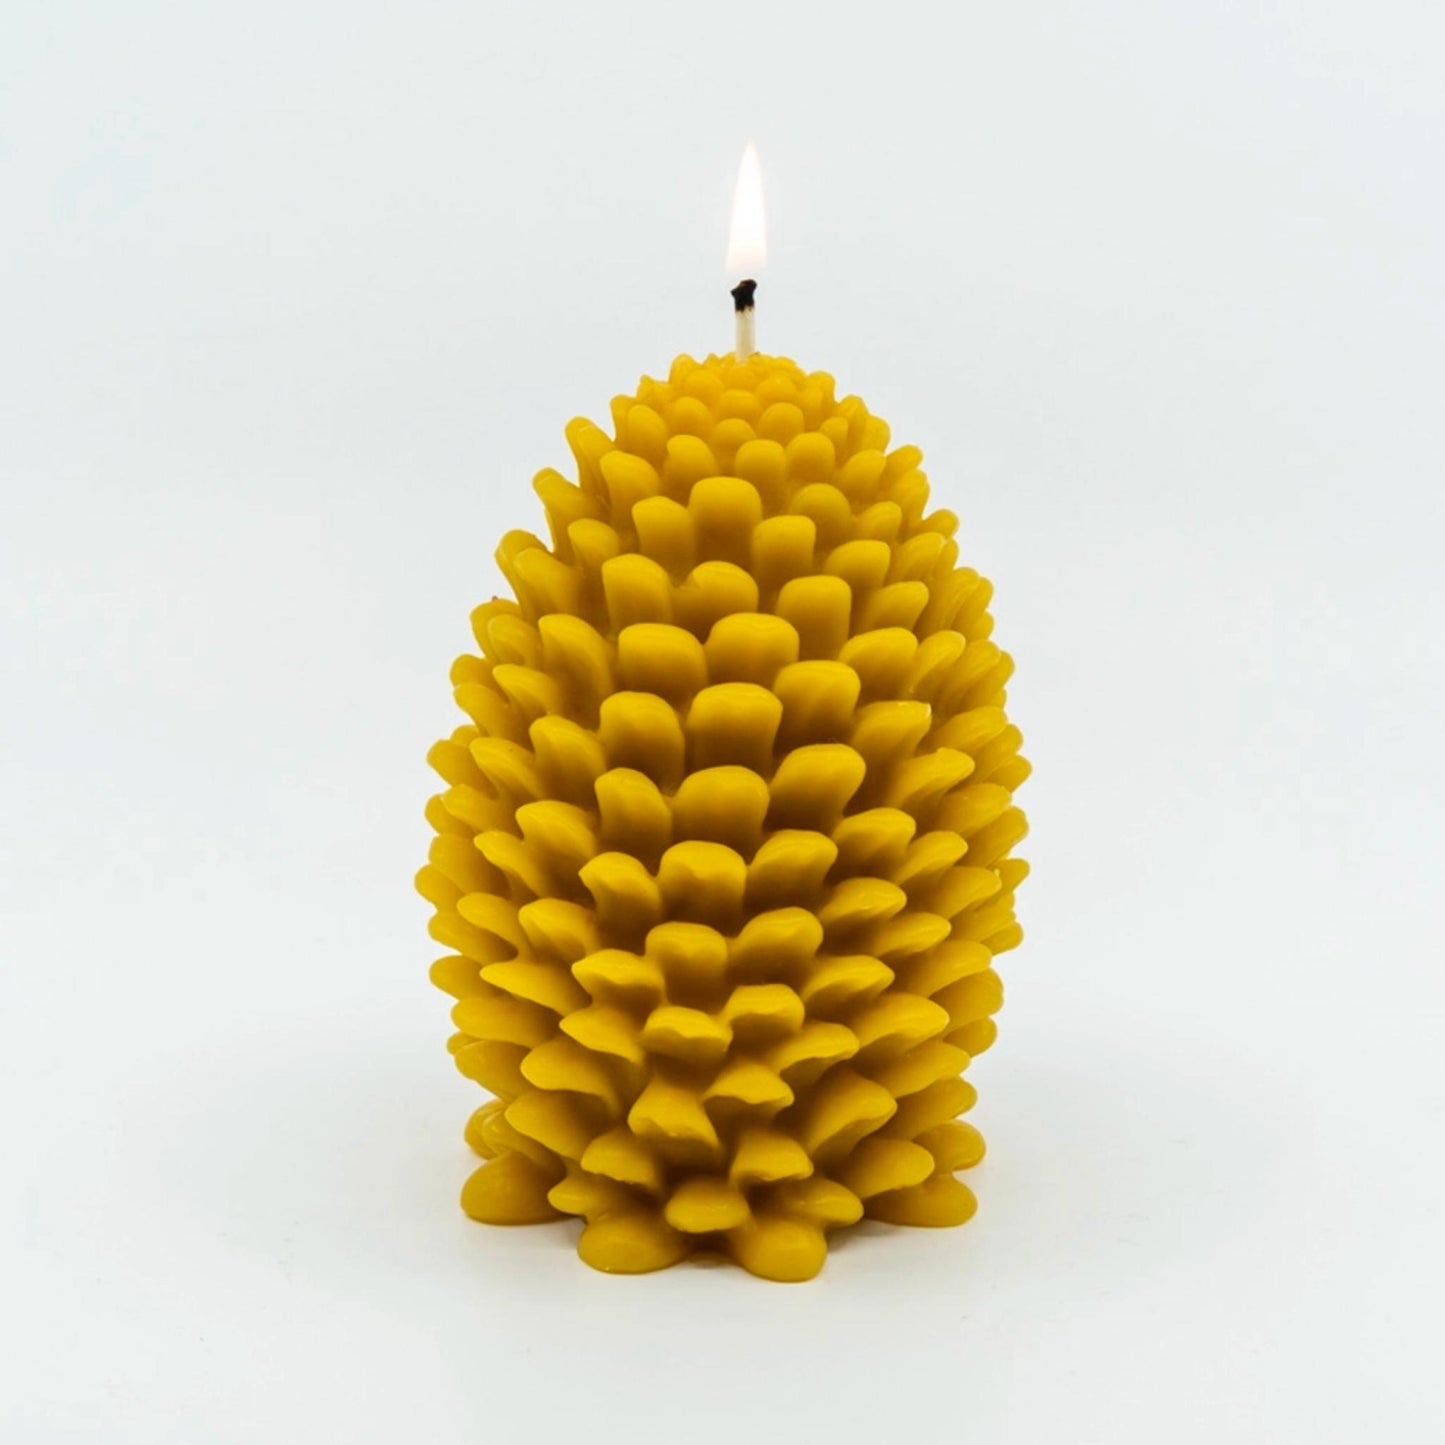 5 inch tall, hand-poured natural beeswax candle in the shape of a pinecone.